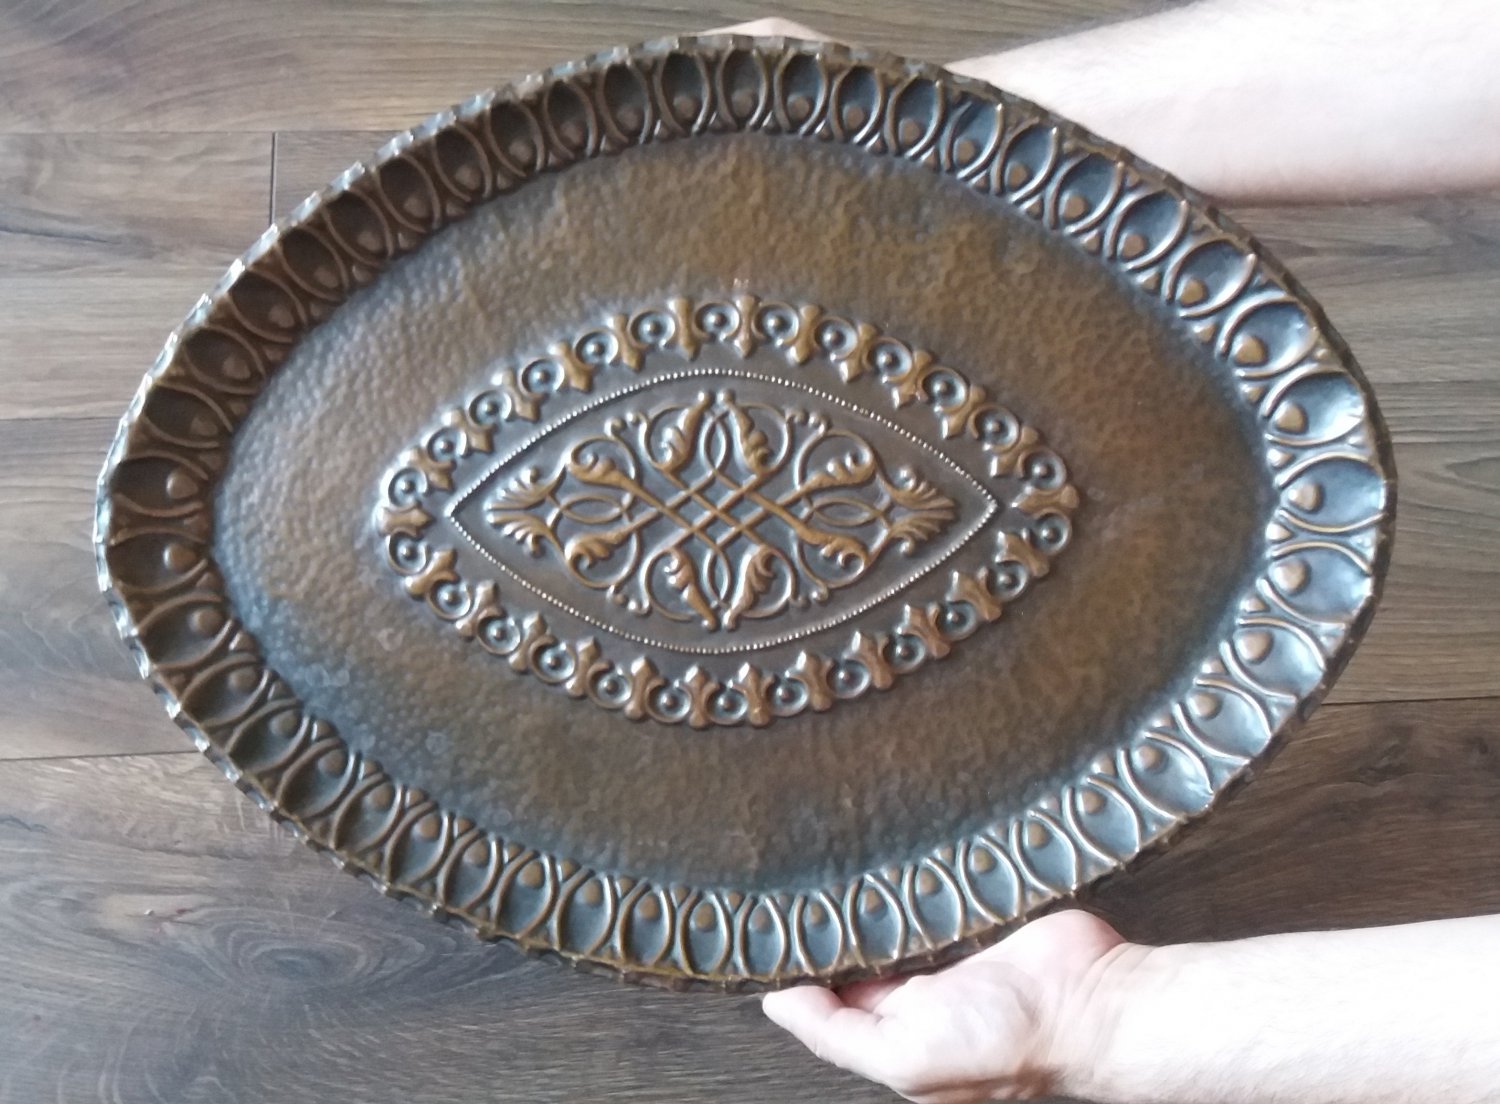 Vintage Embossed Copper Oval Tray Wall Decoration, Home Wall DÃ©cor, Wall Hanging Plate